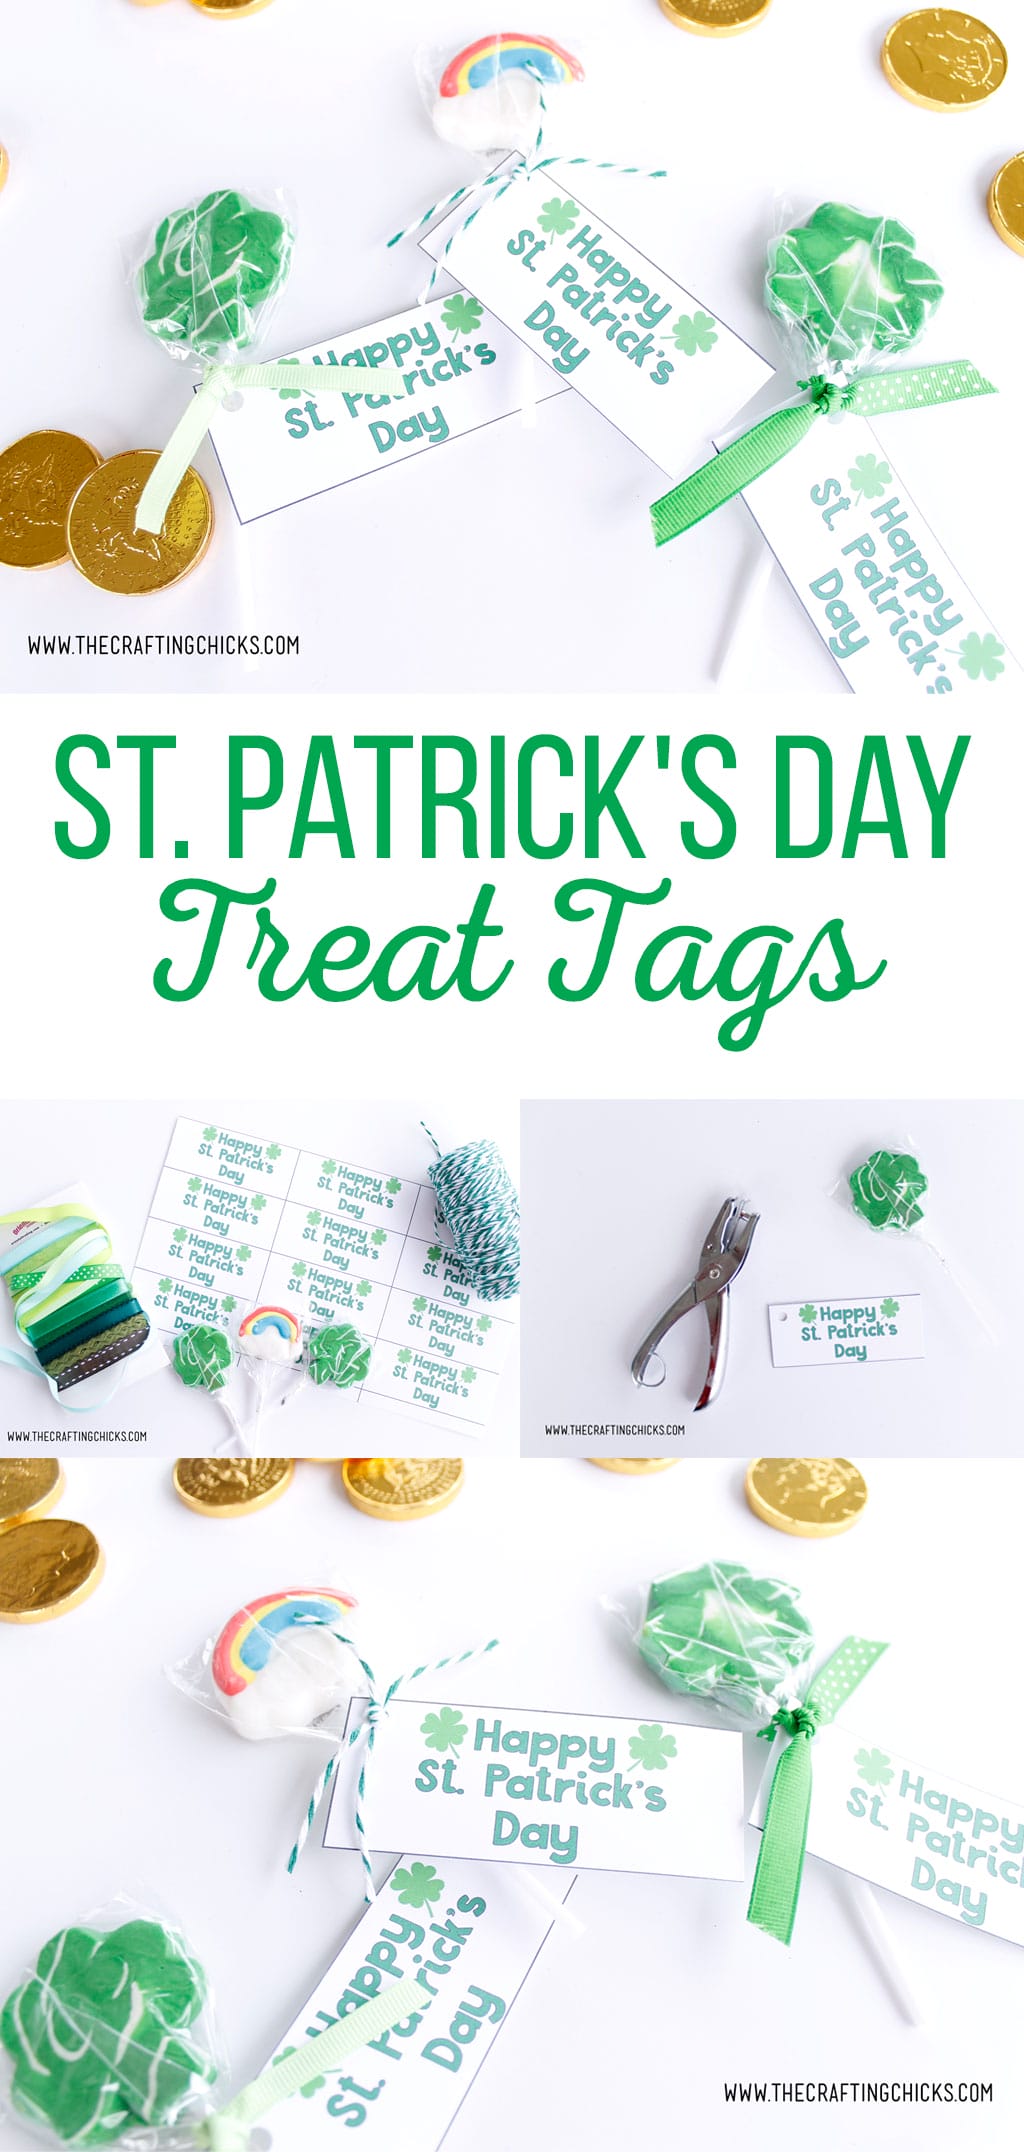 St. Patrick's Day Treat Tags | Are you looking for a way to show your friends and family you're lucky to have them this St. Patrick's Day? These adorable St. Patrick's Day Treat Tags are the perfect way. Print them out and add them to any gift.